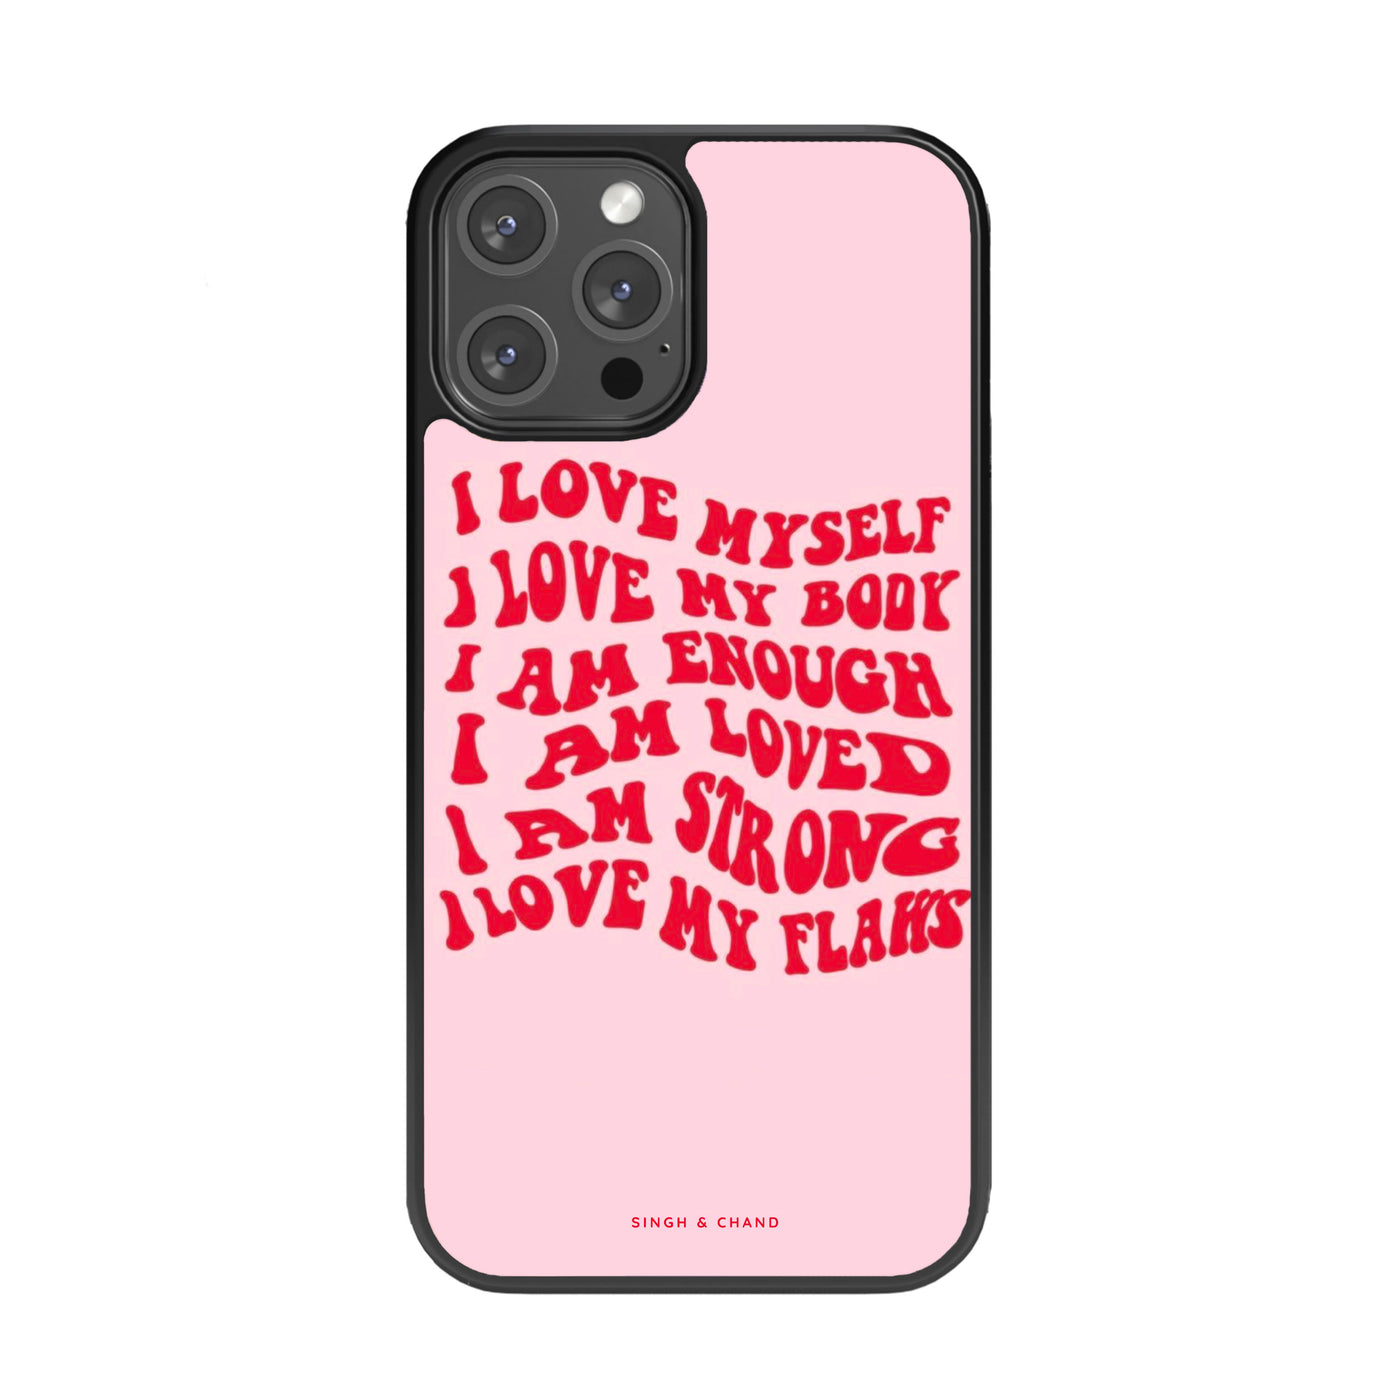 Body Positive Affirmations Glass Phone Case